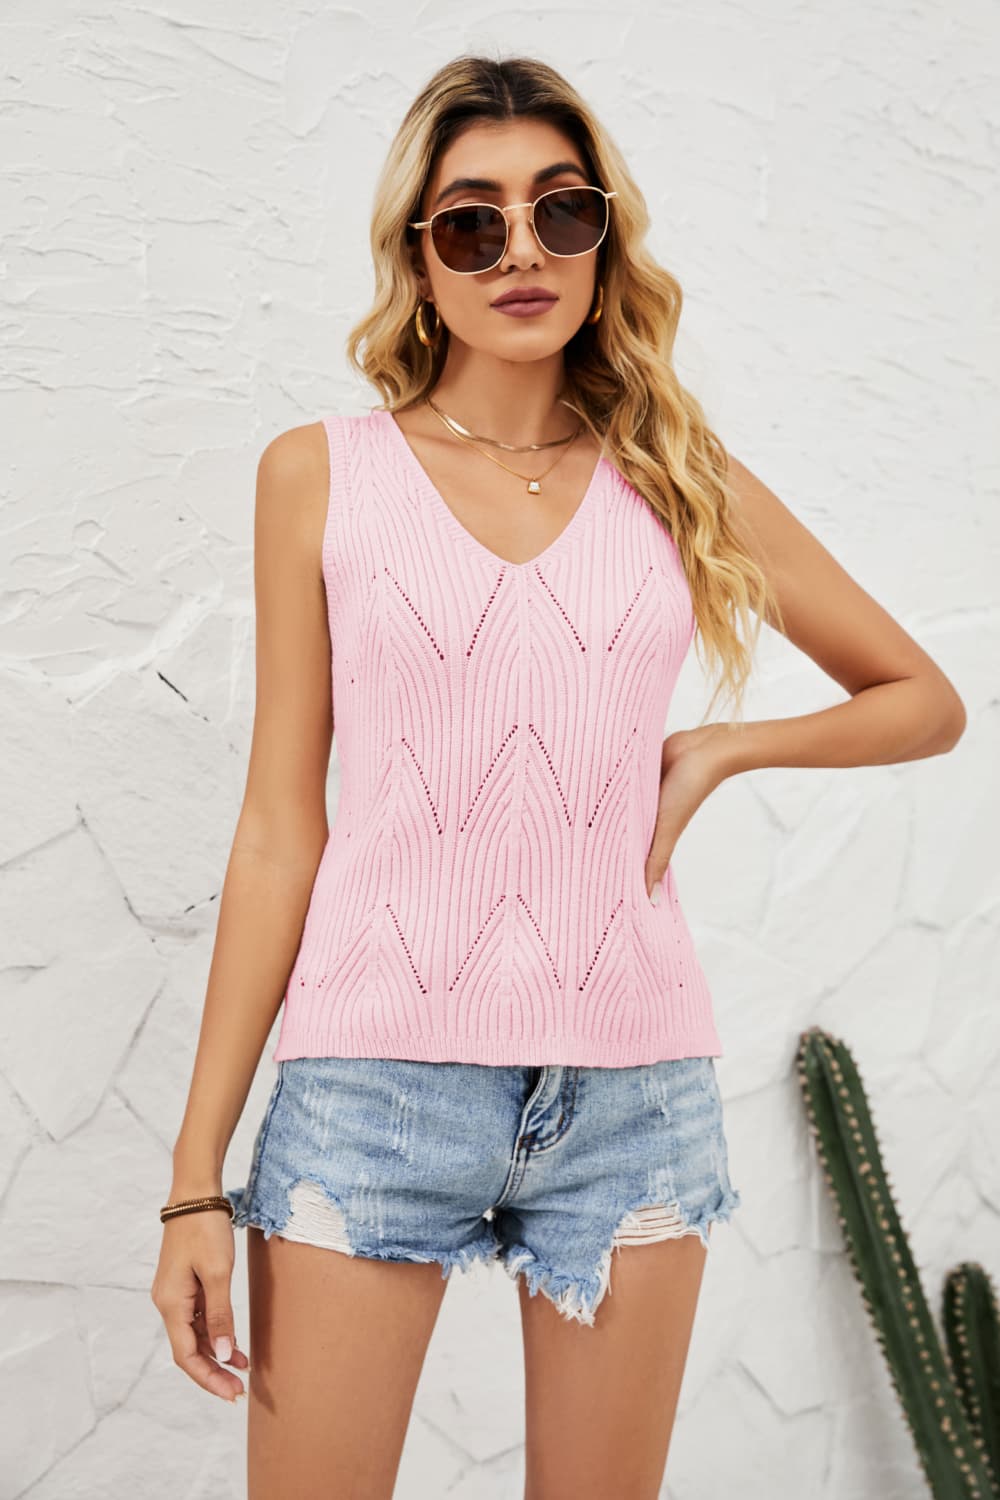 Mango Sunset V-Neck Knit Top | Hypoallergenic - Allergy Friendly - Naturally Free